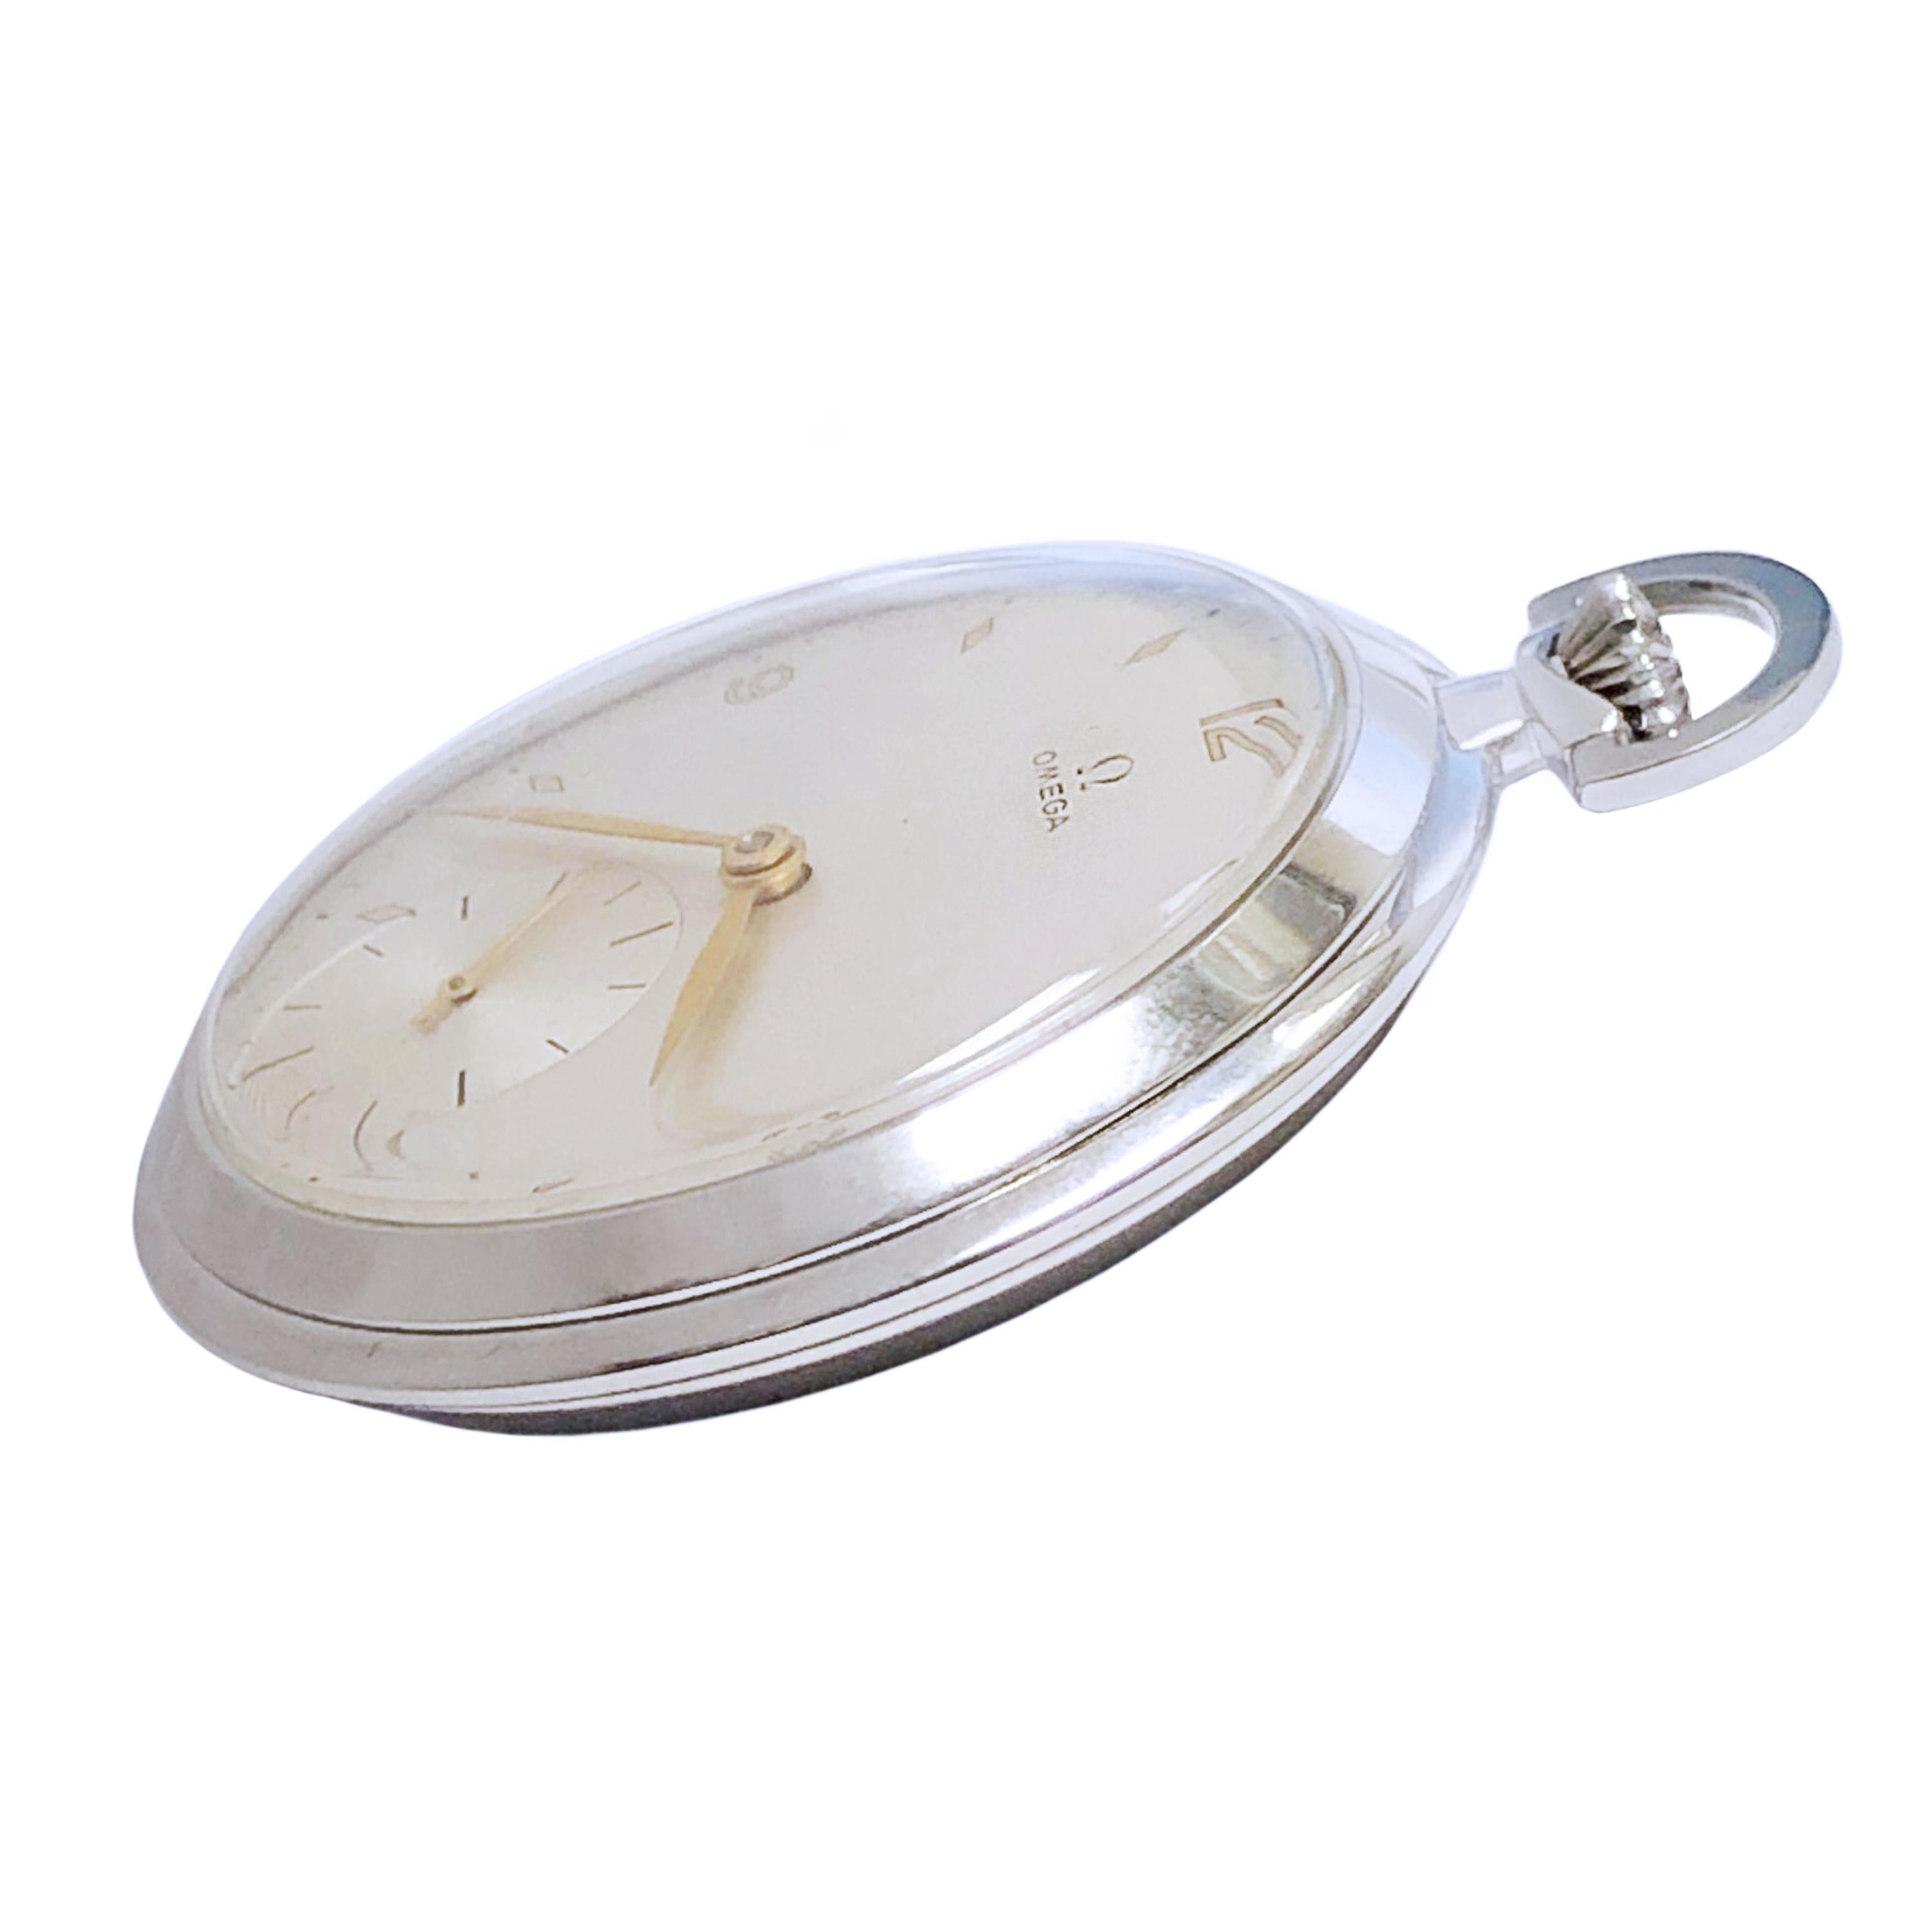 Circa 1930s Omega Gents Pocket Watch, 48 MM 3 piece Stainless Steel Art Deco signed Omega case, 17 Jewel Mechanical, Manual wind Nickle Lever movement,  original Silver Satin dial with Gold Mirrored markers and Gold hands. Recently serviced and